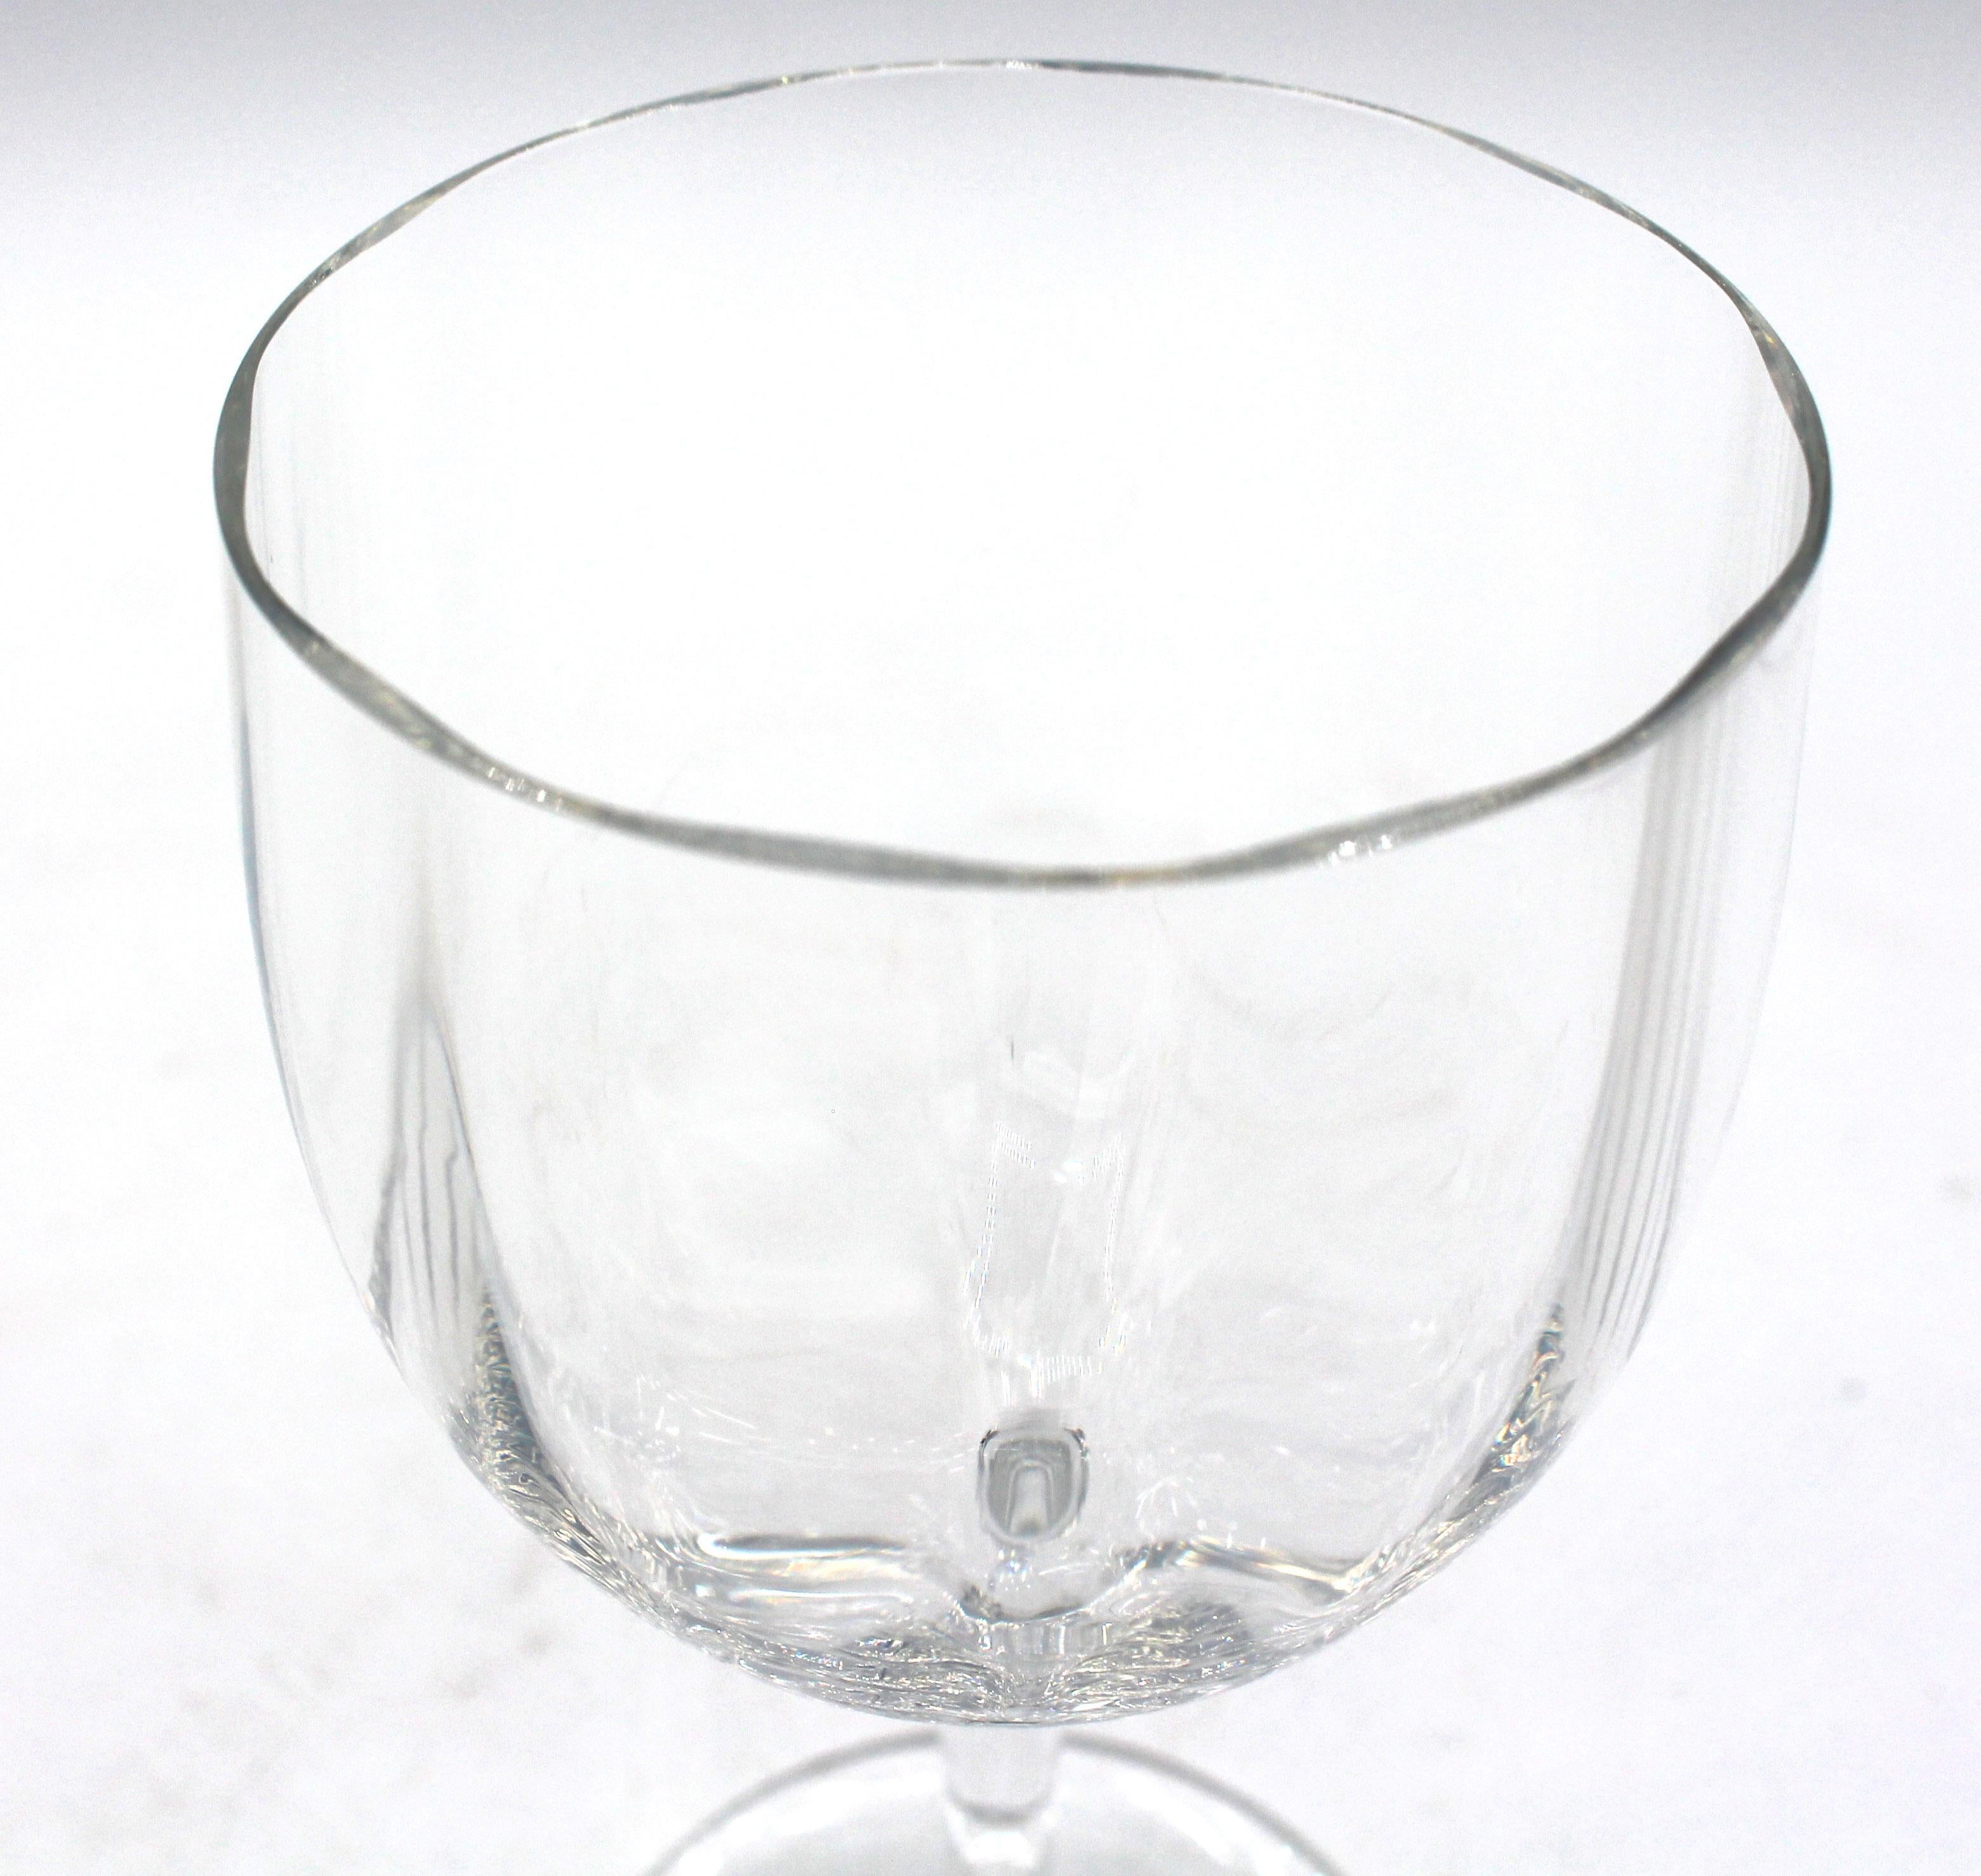 Modern Set of 12 Baccarat Montaigne Optic Clarets or White Wines